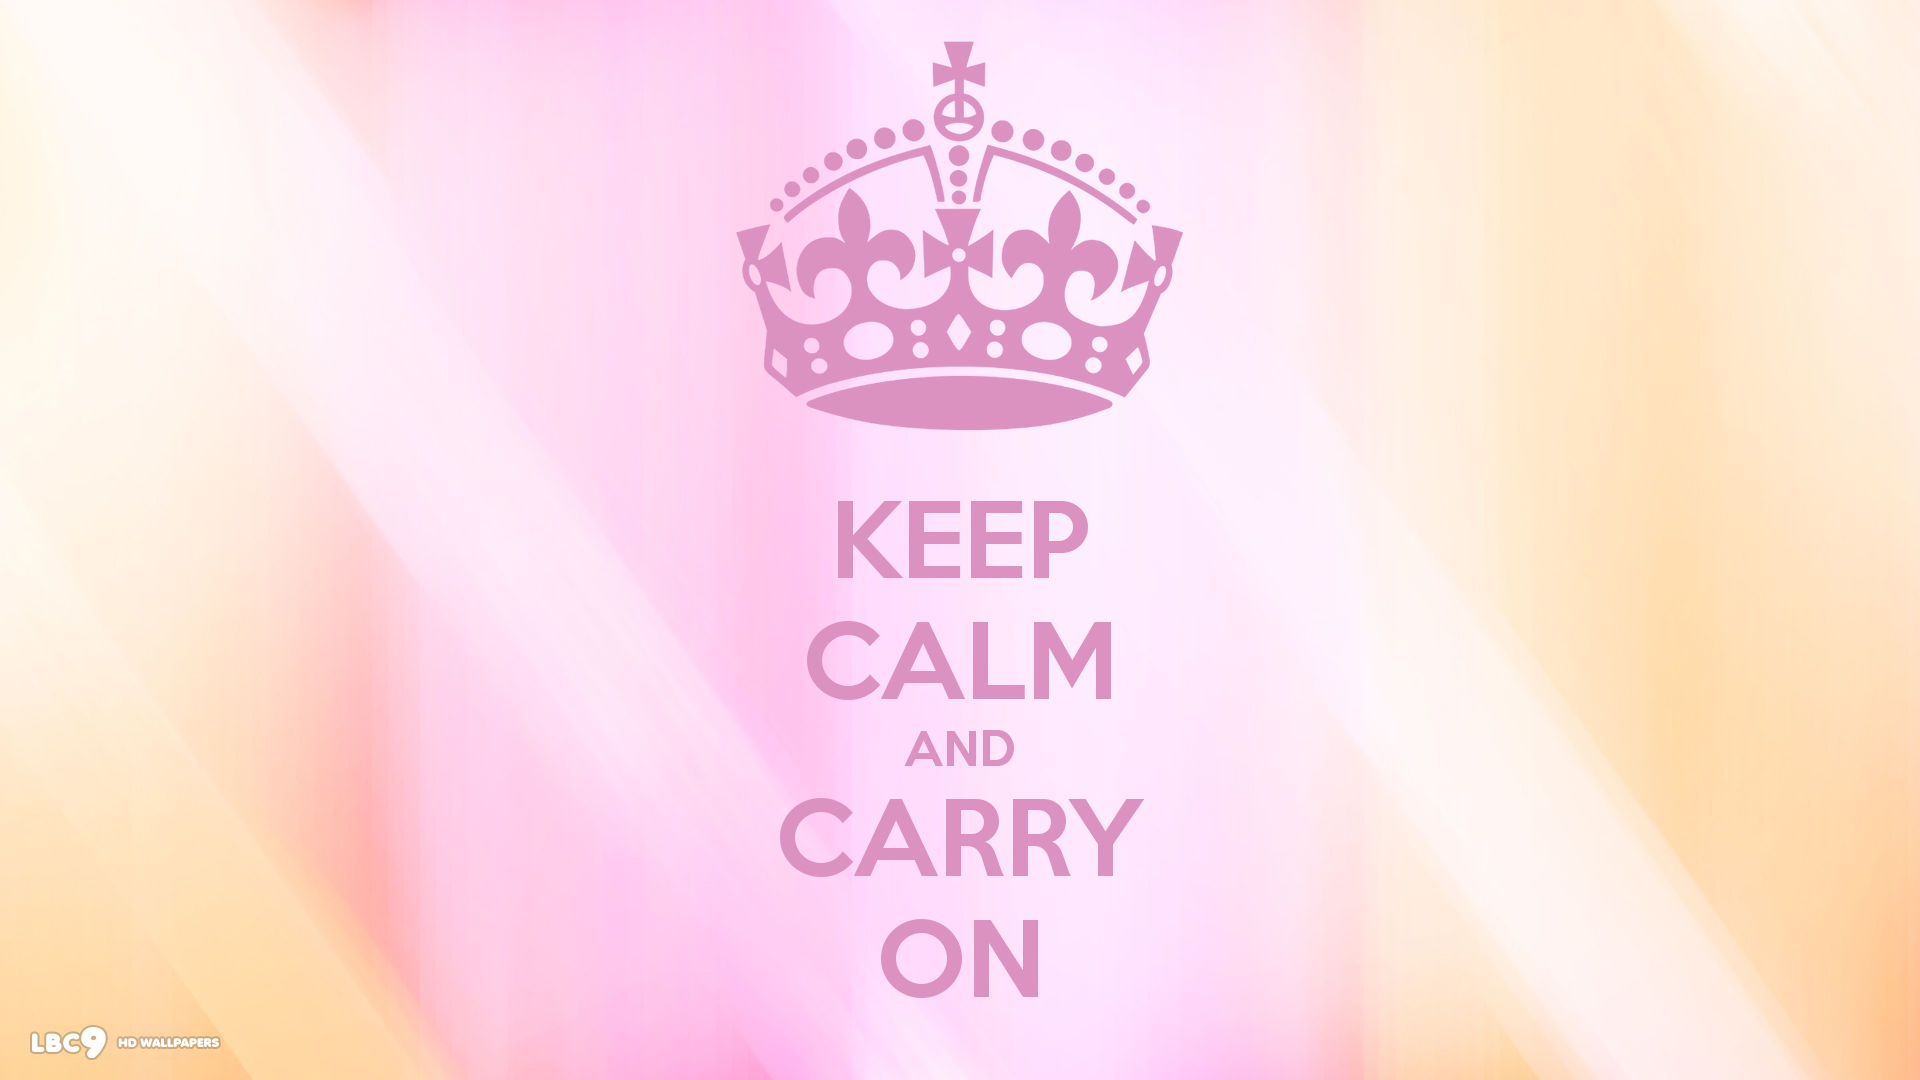 keep calm and carry on wallpaper,crown,pink,text,logo,product